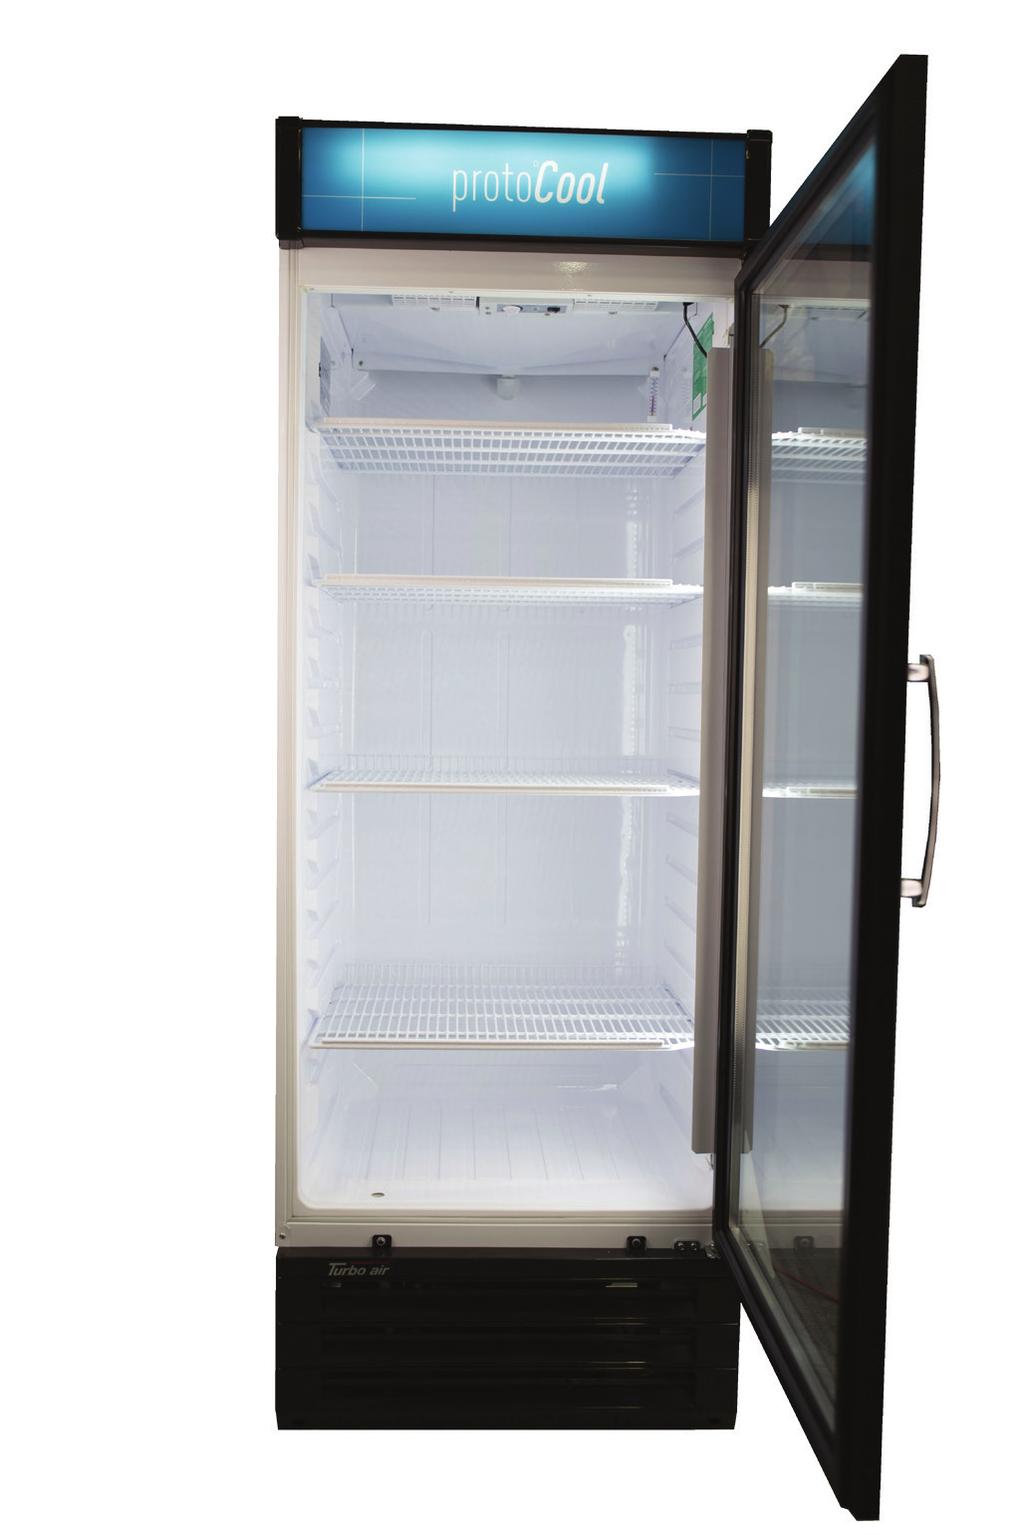 refrigerators and freezers are well-suited for storage of buffers, stains, and other non-explosive chemicals.